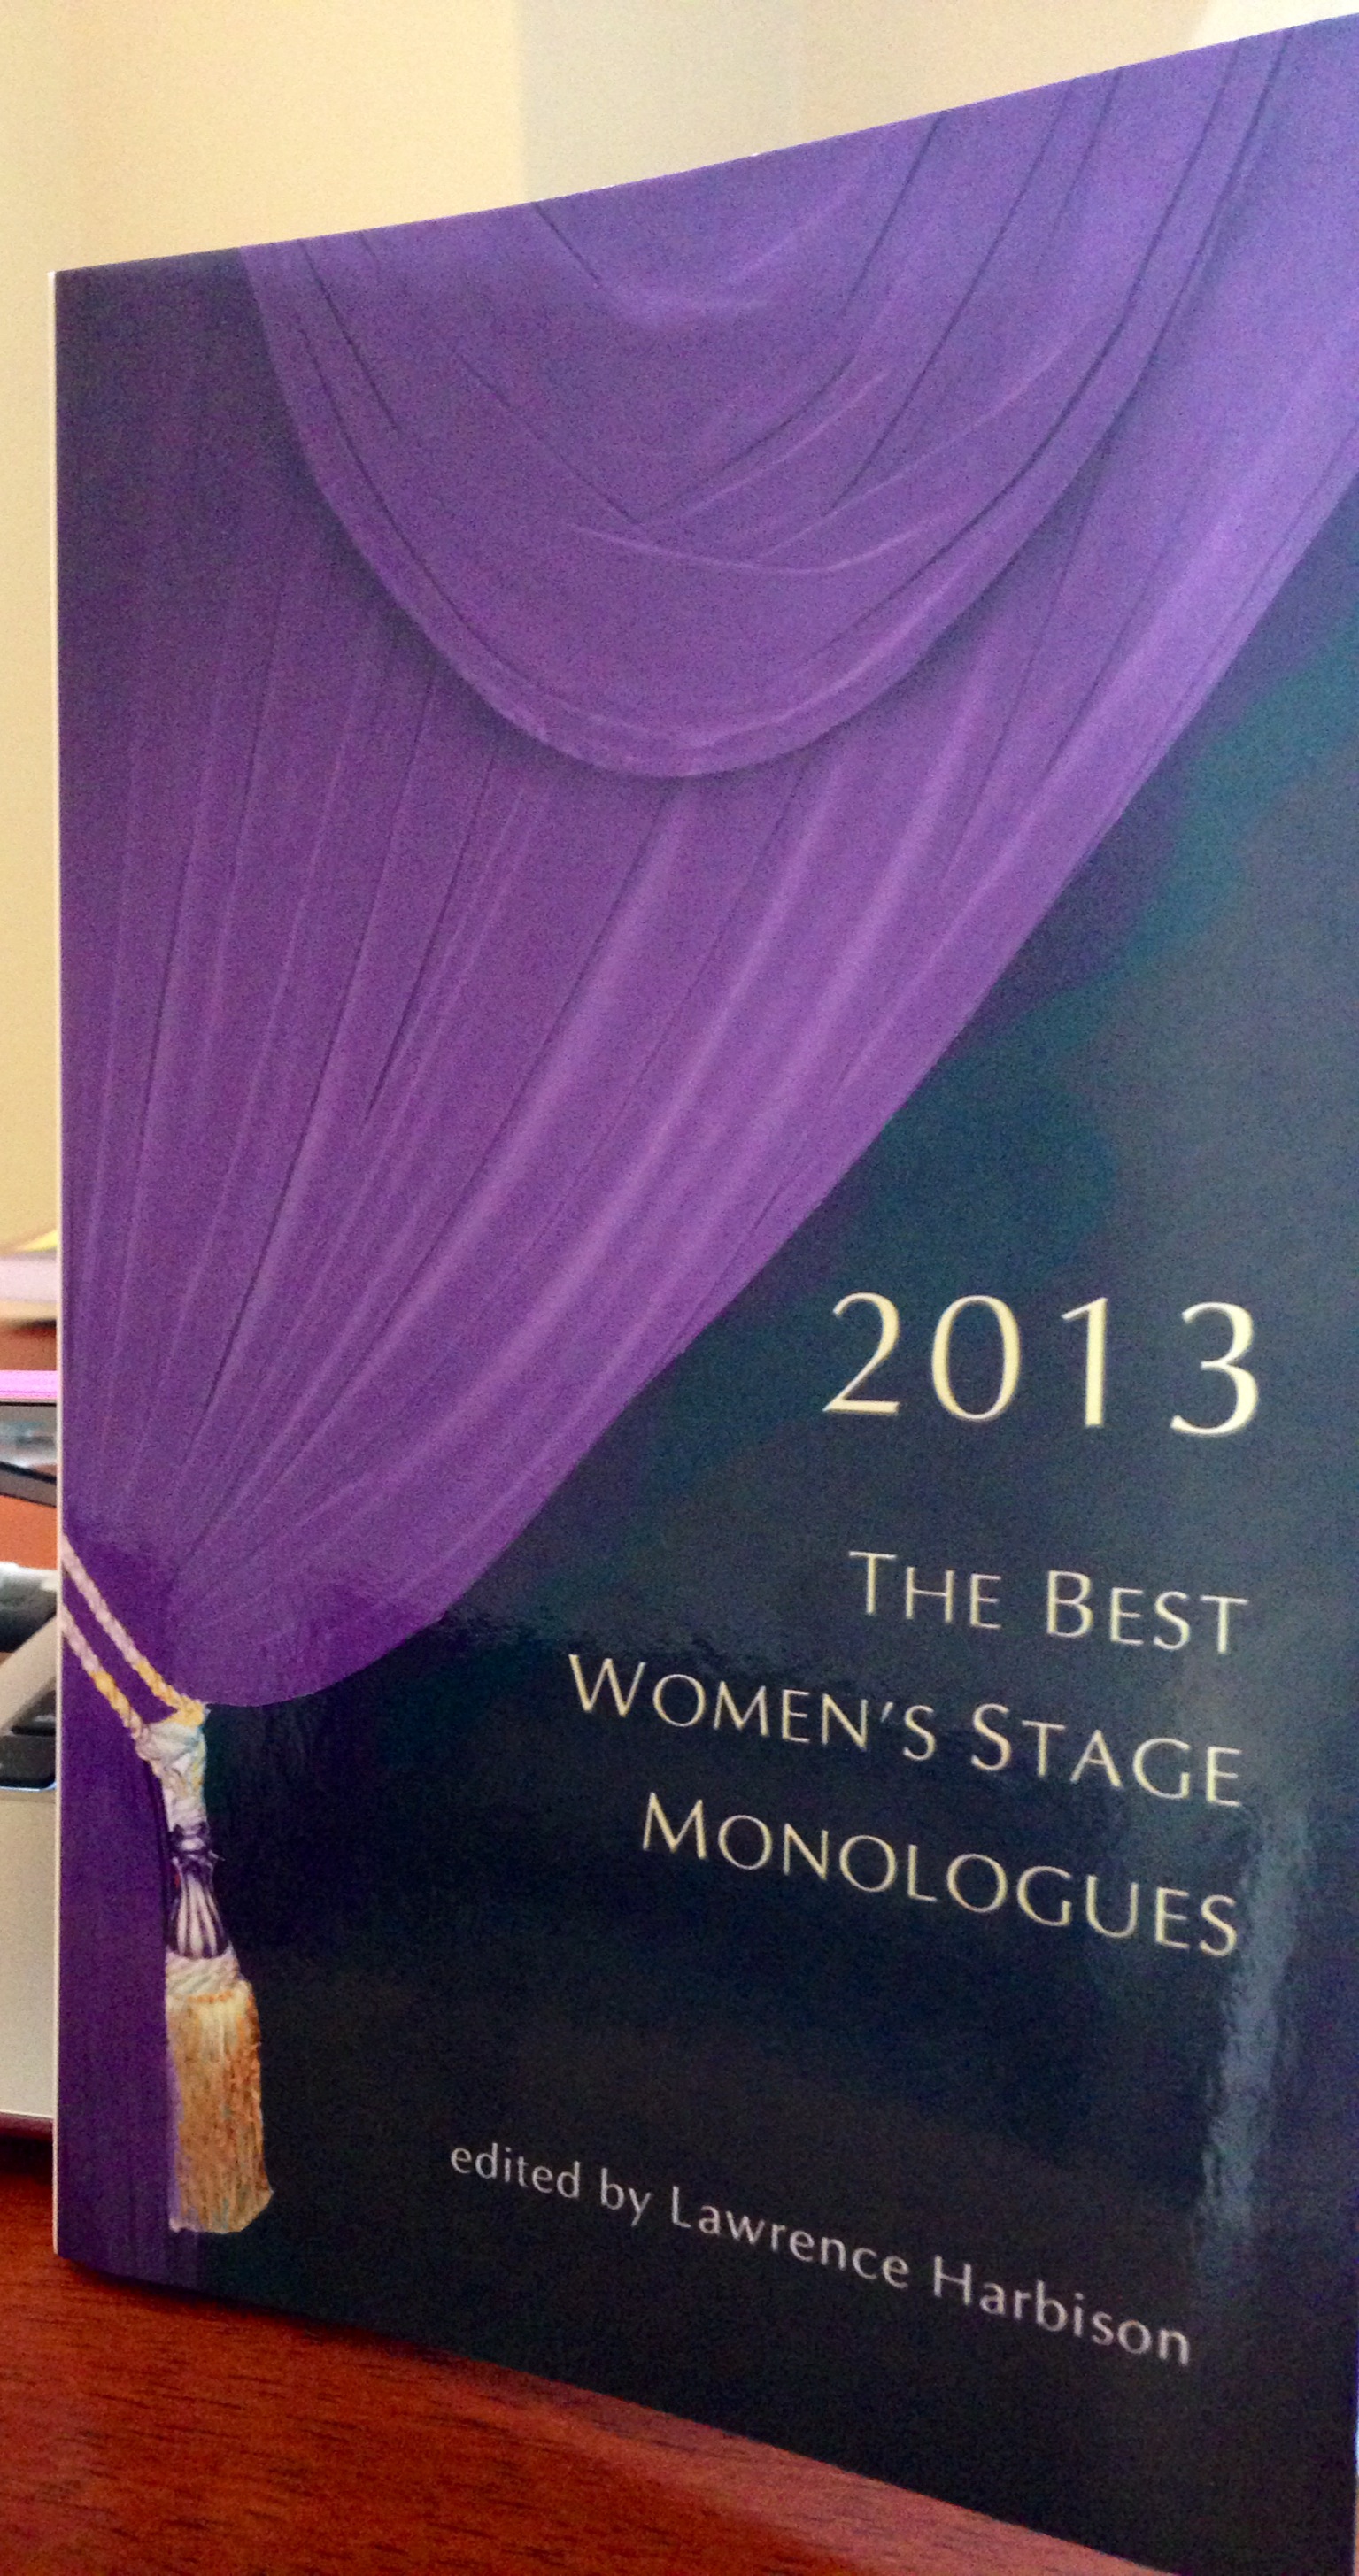 Alana published in The Best Women’s Stage Monologues 2013 and The Best Men’s Stage Monologues 2013